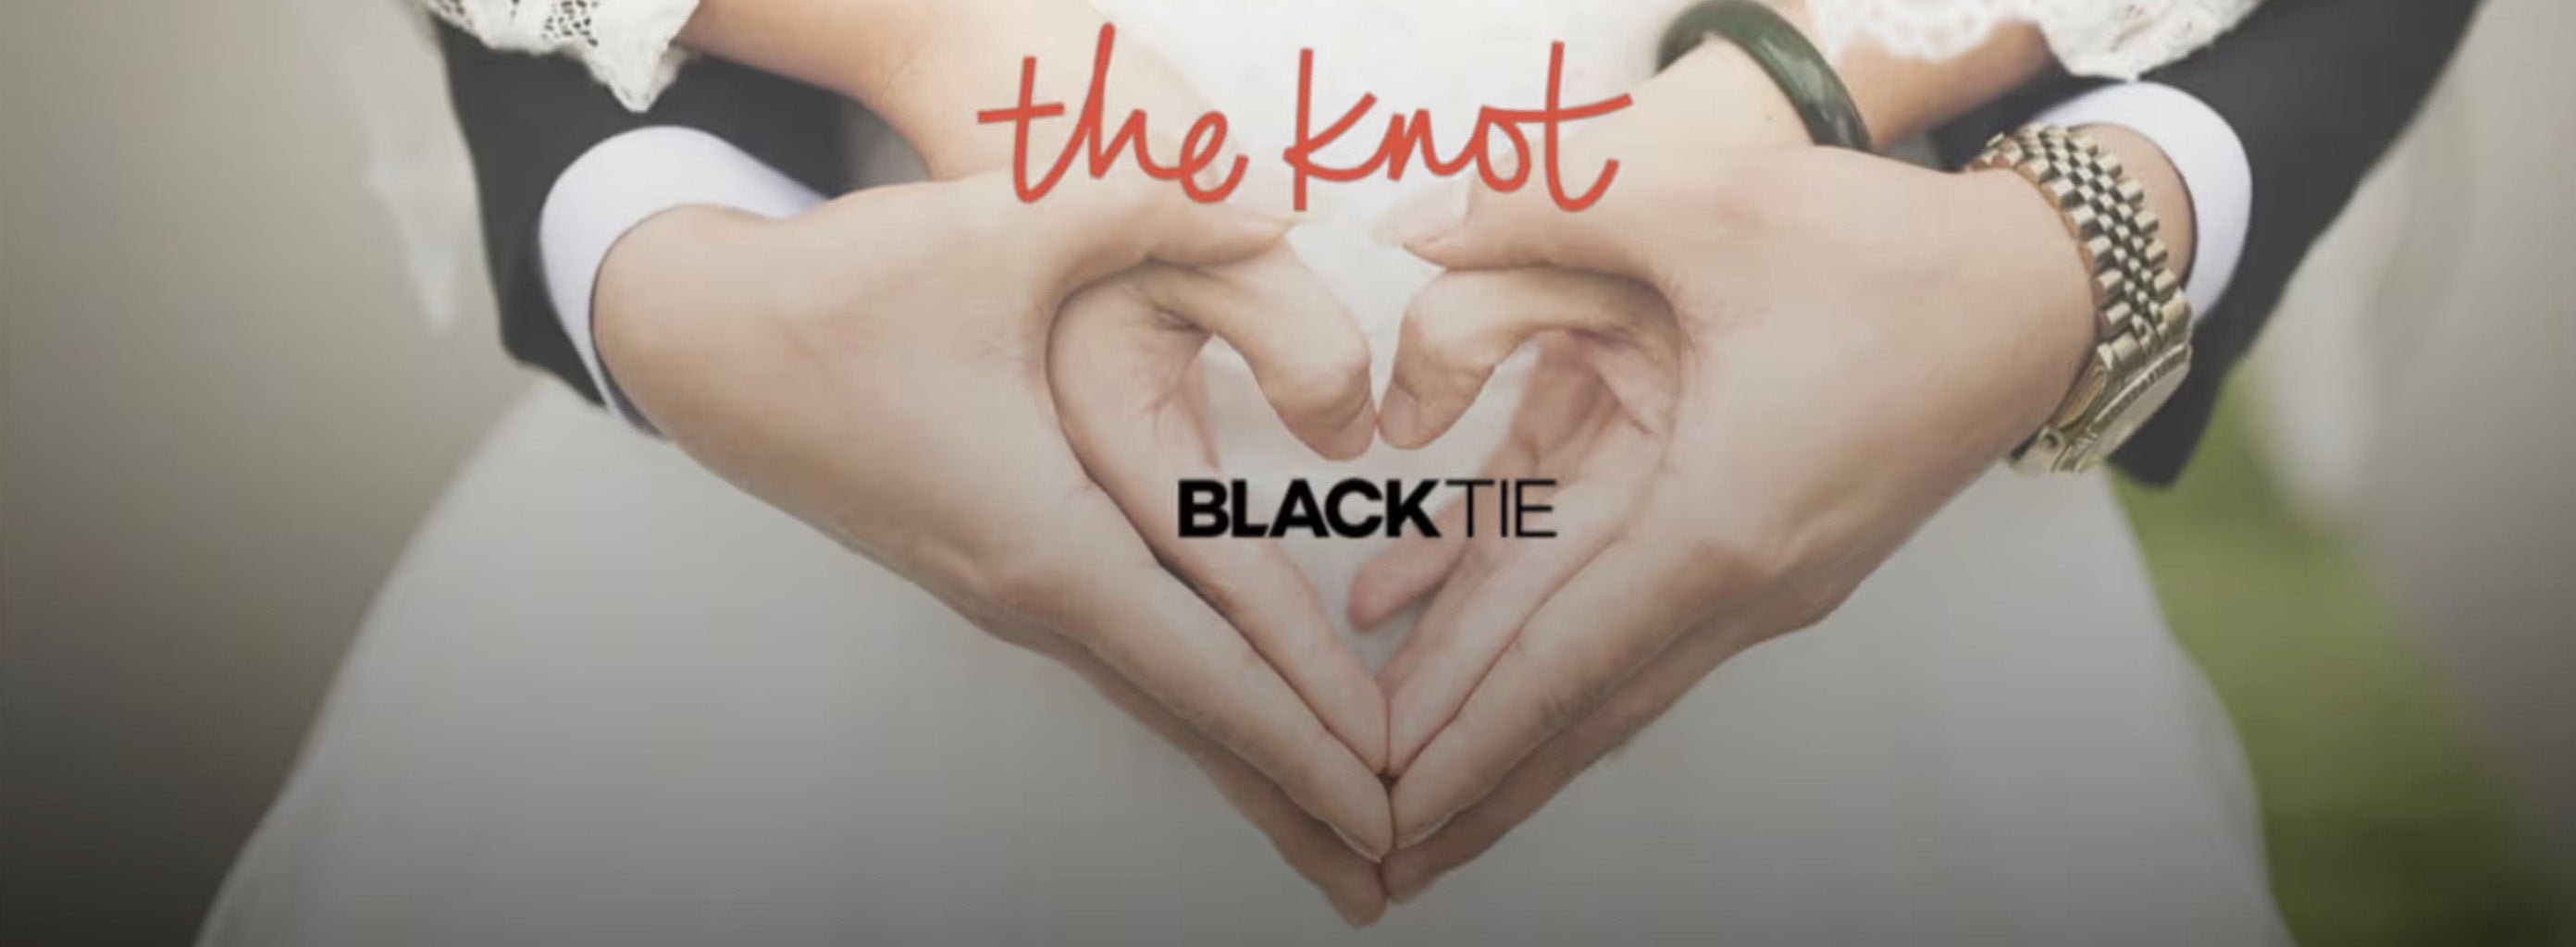 The Knot loves BLACKTIE